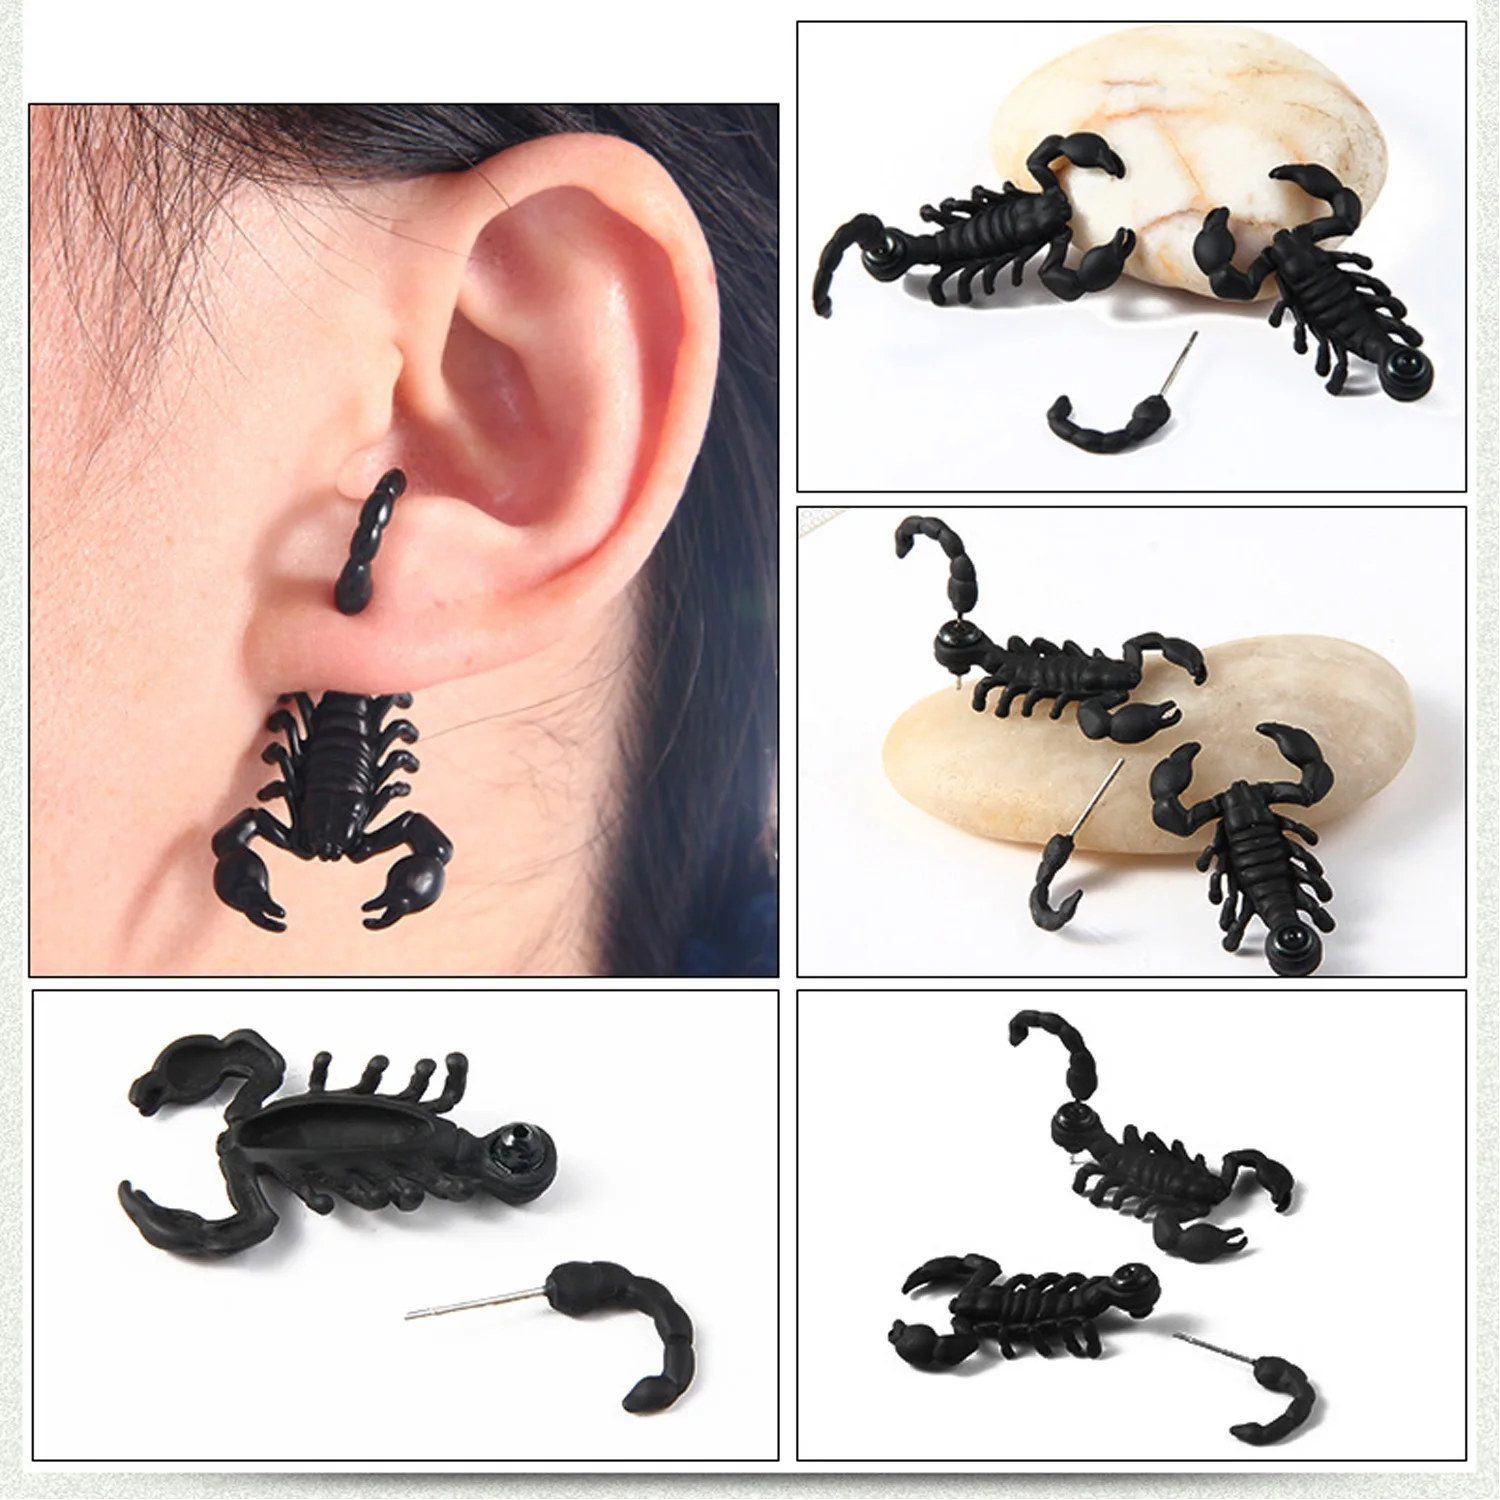 Besegad 1PCS 3D Creepy Black Scorpion Ear Stud Earrings Gothic Punk Jewelry for Halloween Cosplay Masquerade Party Decoration